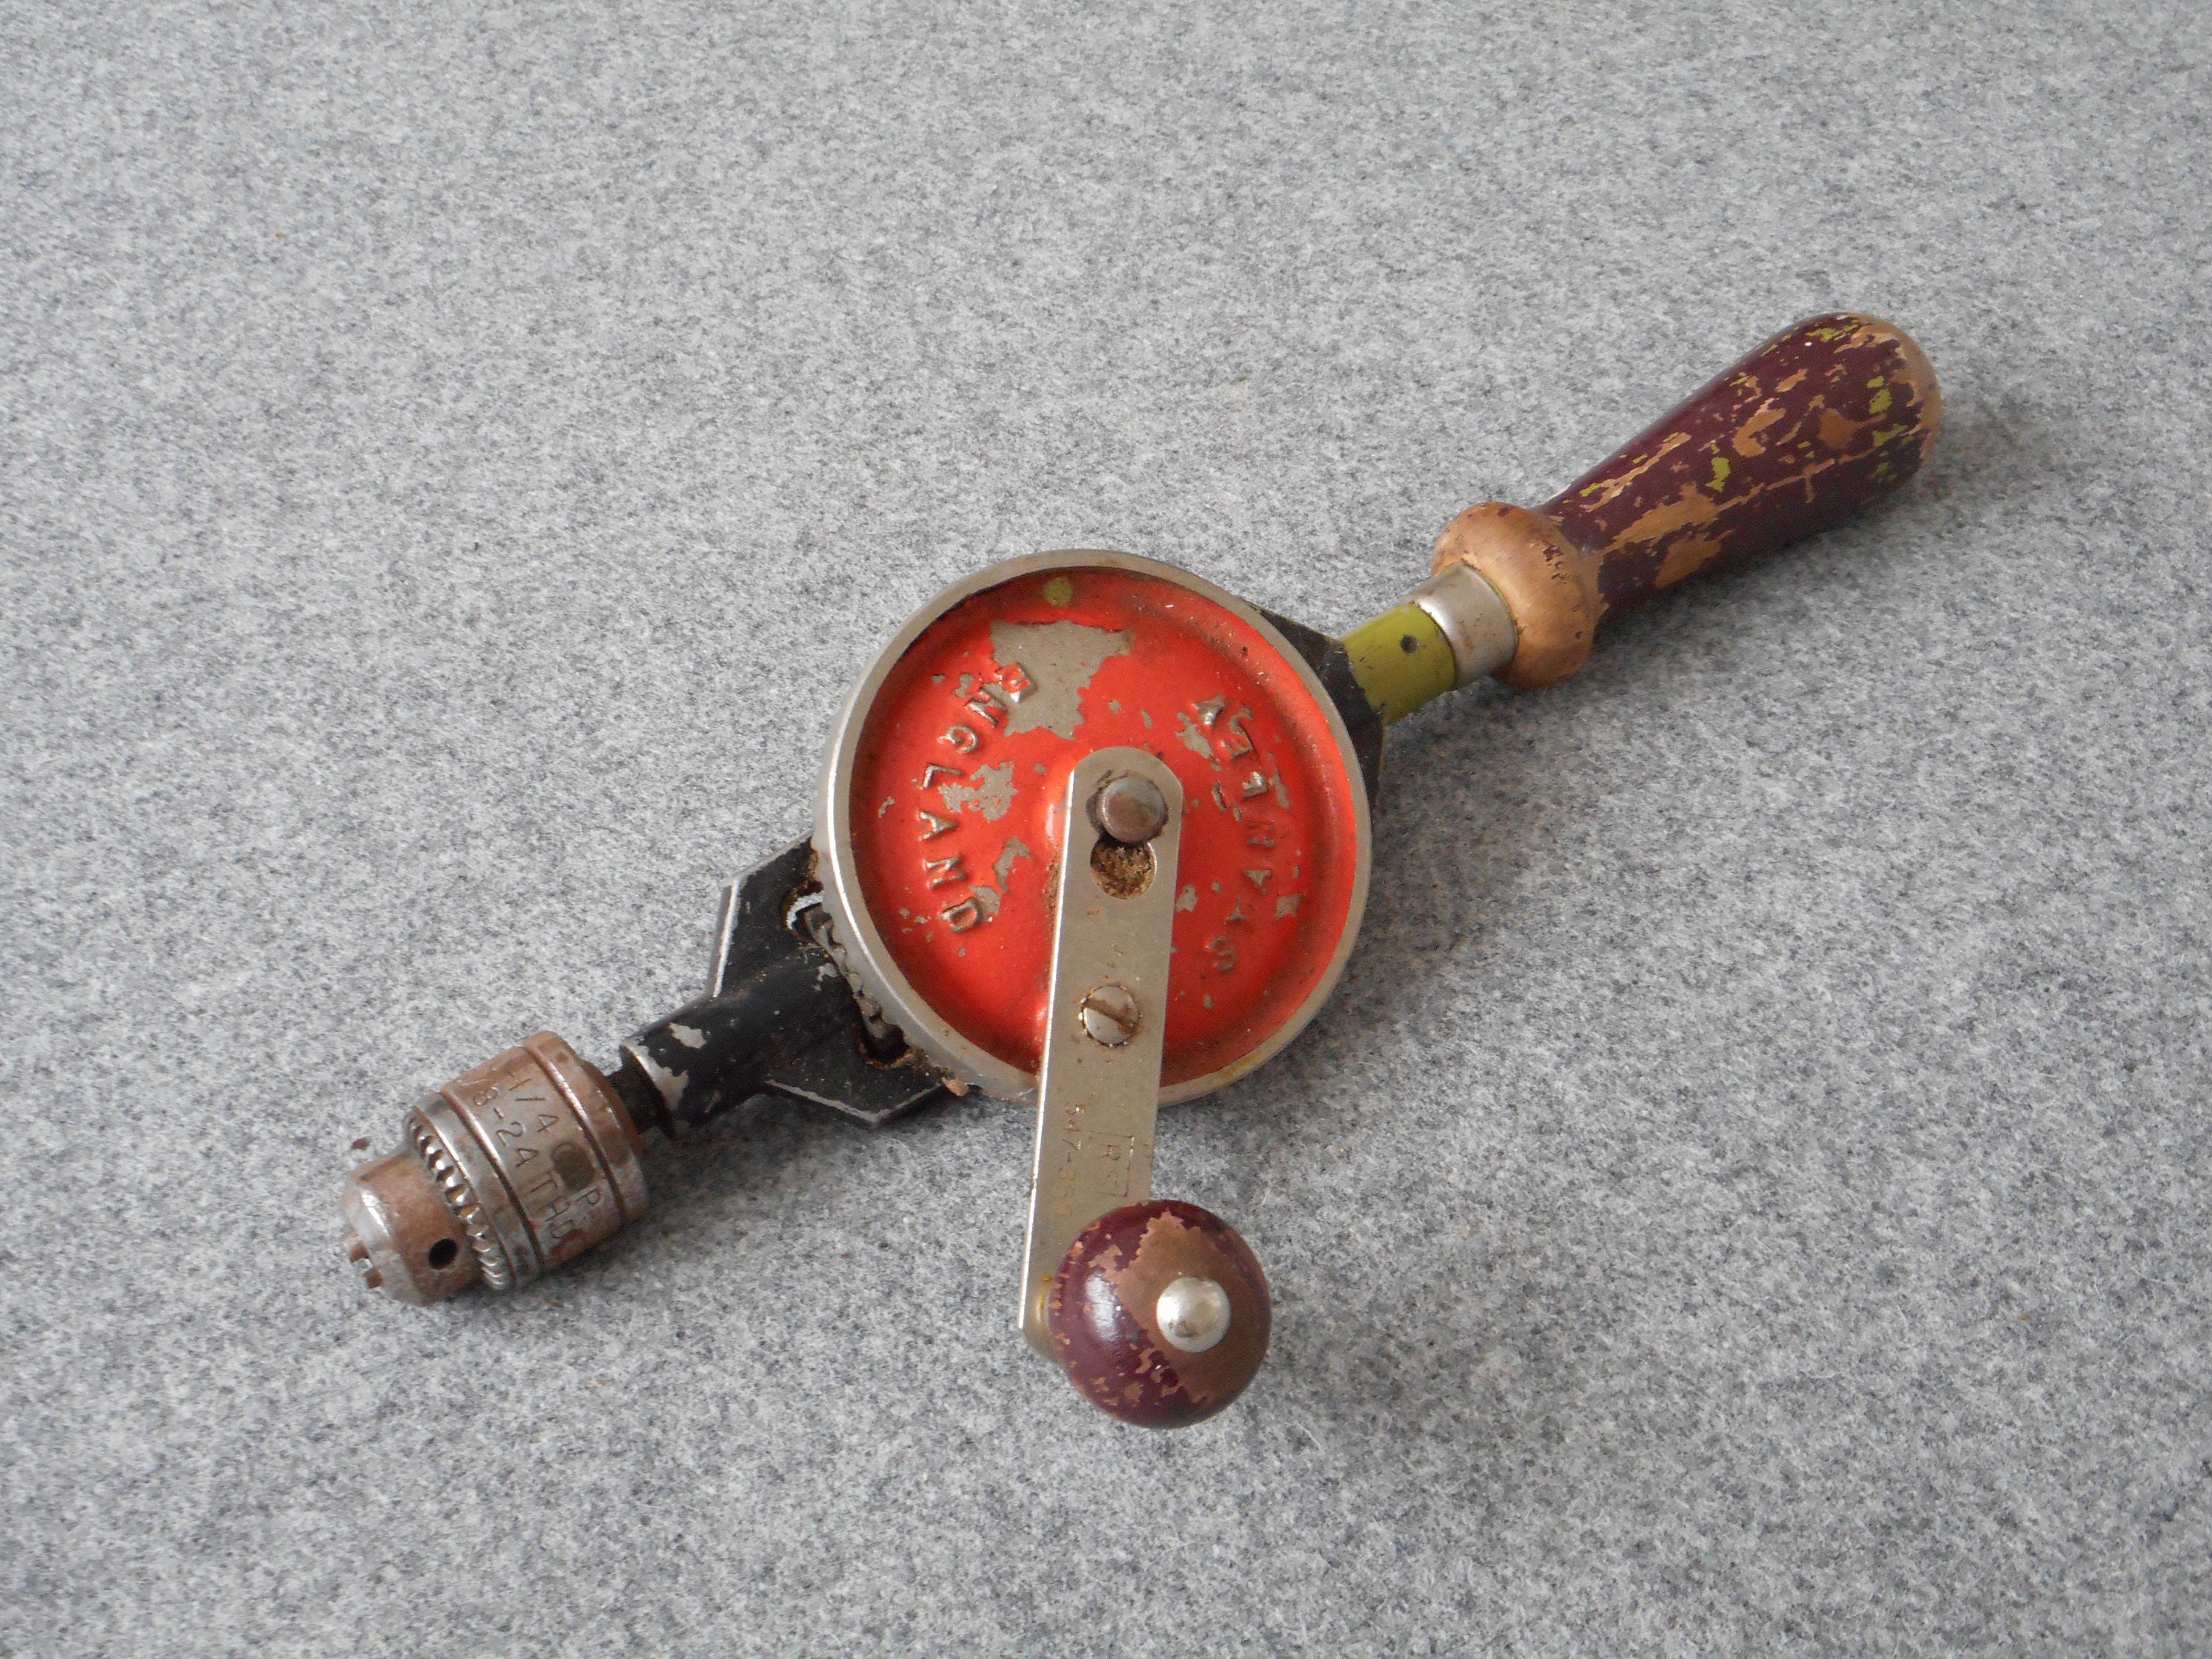 A Good Vintage Hobby Hand Drill. Vintage, Small, Hand Drill by HY Squire &  Sons Ltd. Small Hand Drill for Jewellery or Small Hobbies/crafts. 